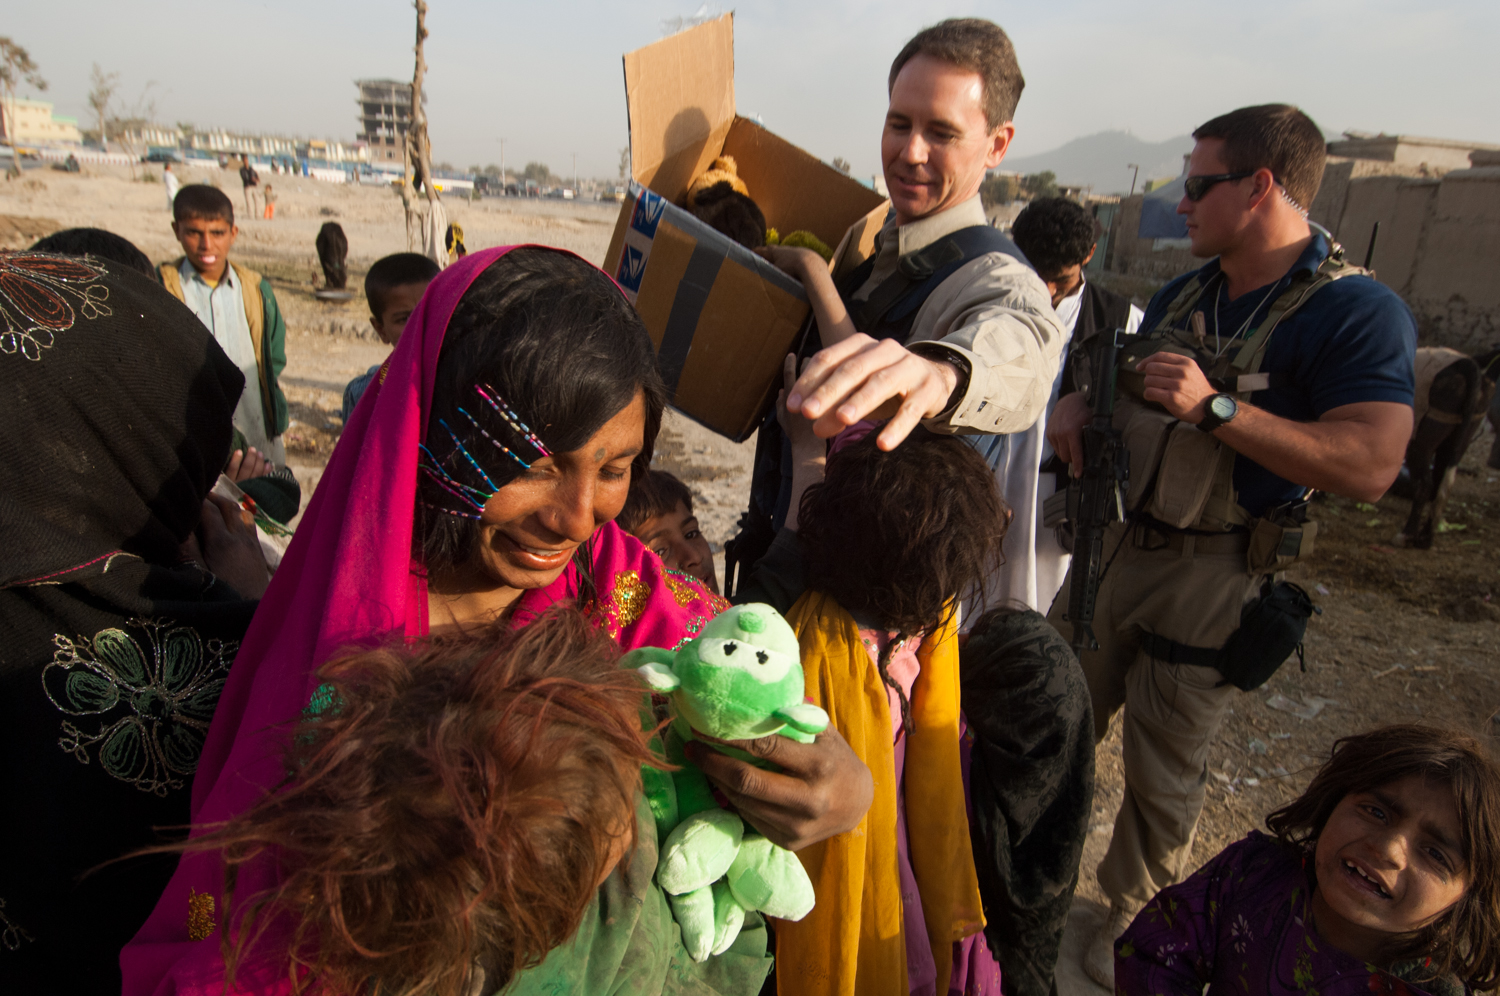  John Ferguson, Country Business Manager for DynCorp International, a publicly traded, multi-million dollar private military company contracted by the US State Department to train the Afghan police force, hands out toys to Afghan children while being